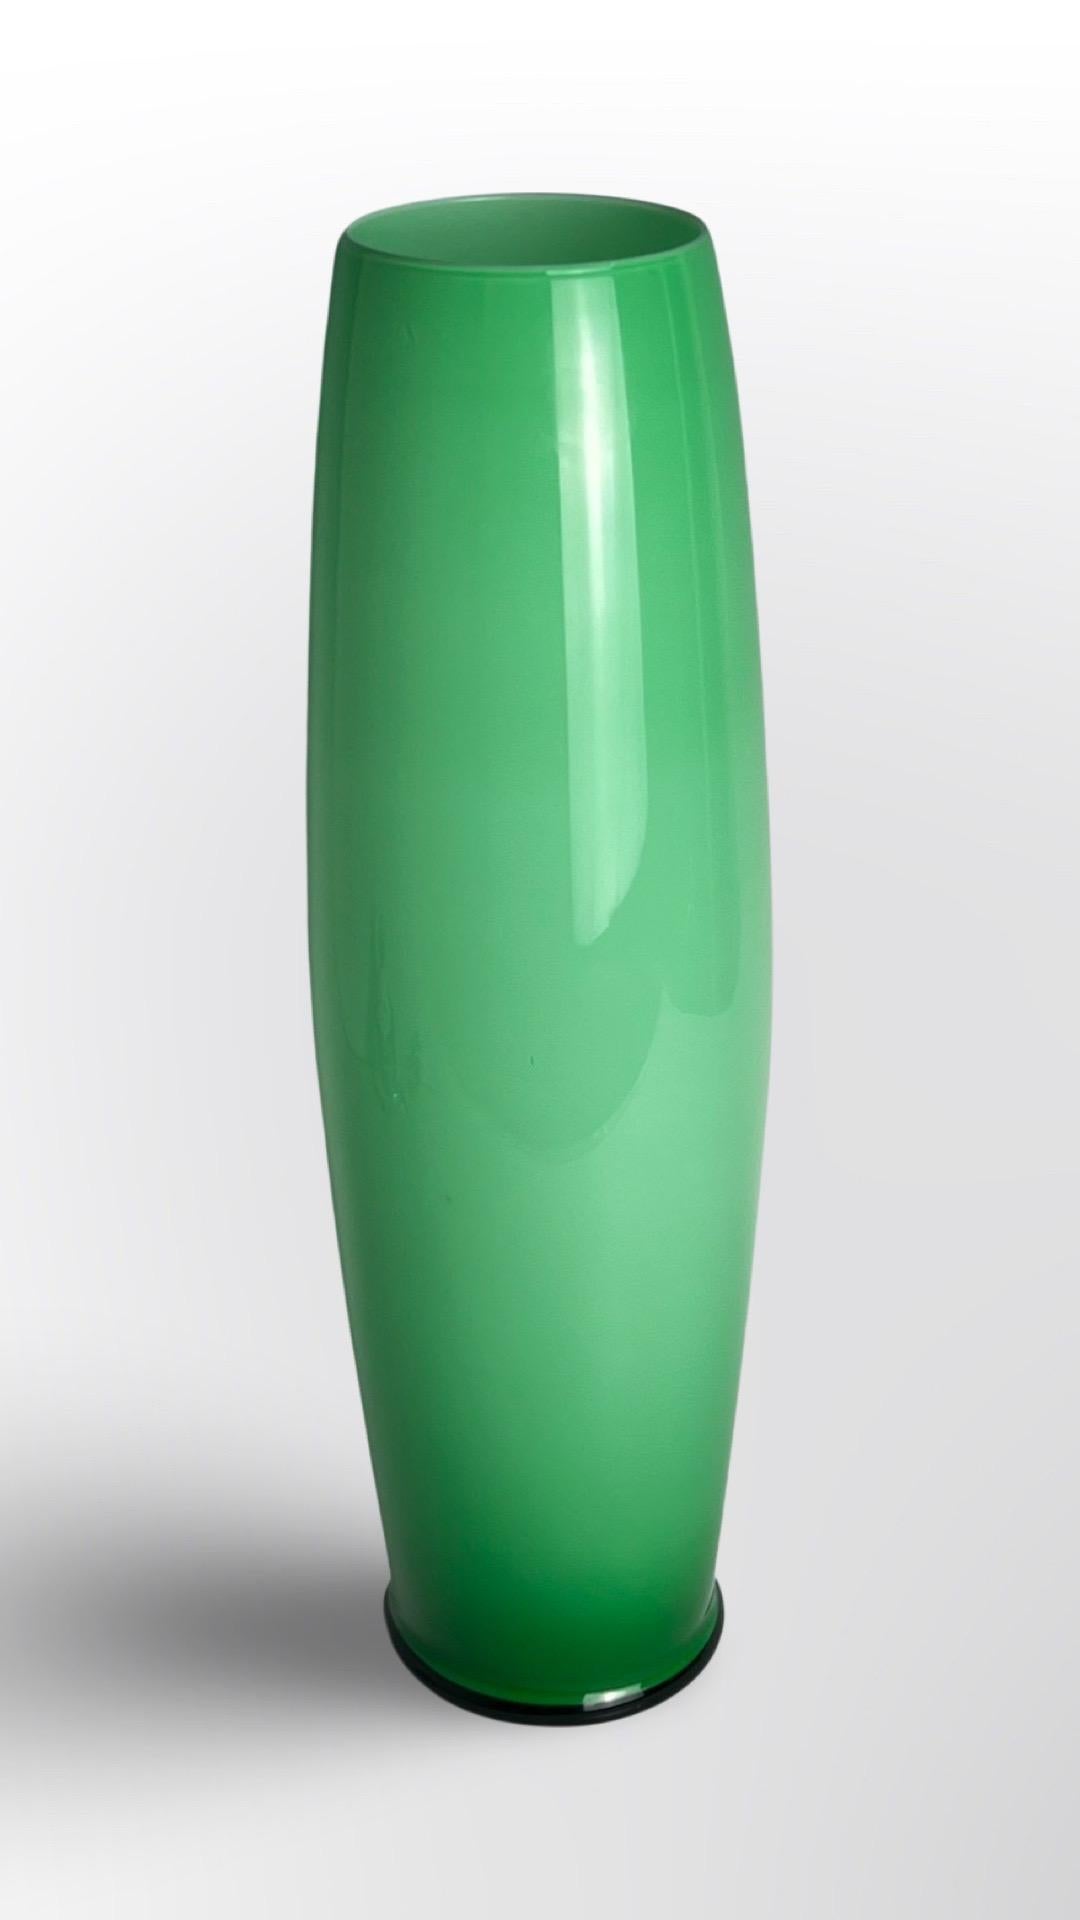 A Jade Green tall cylindrical murano glass vase.
Made in Italy
Circa: 1960